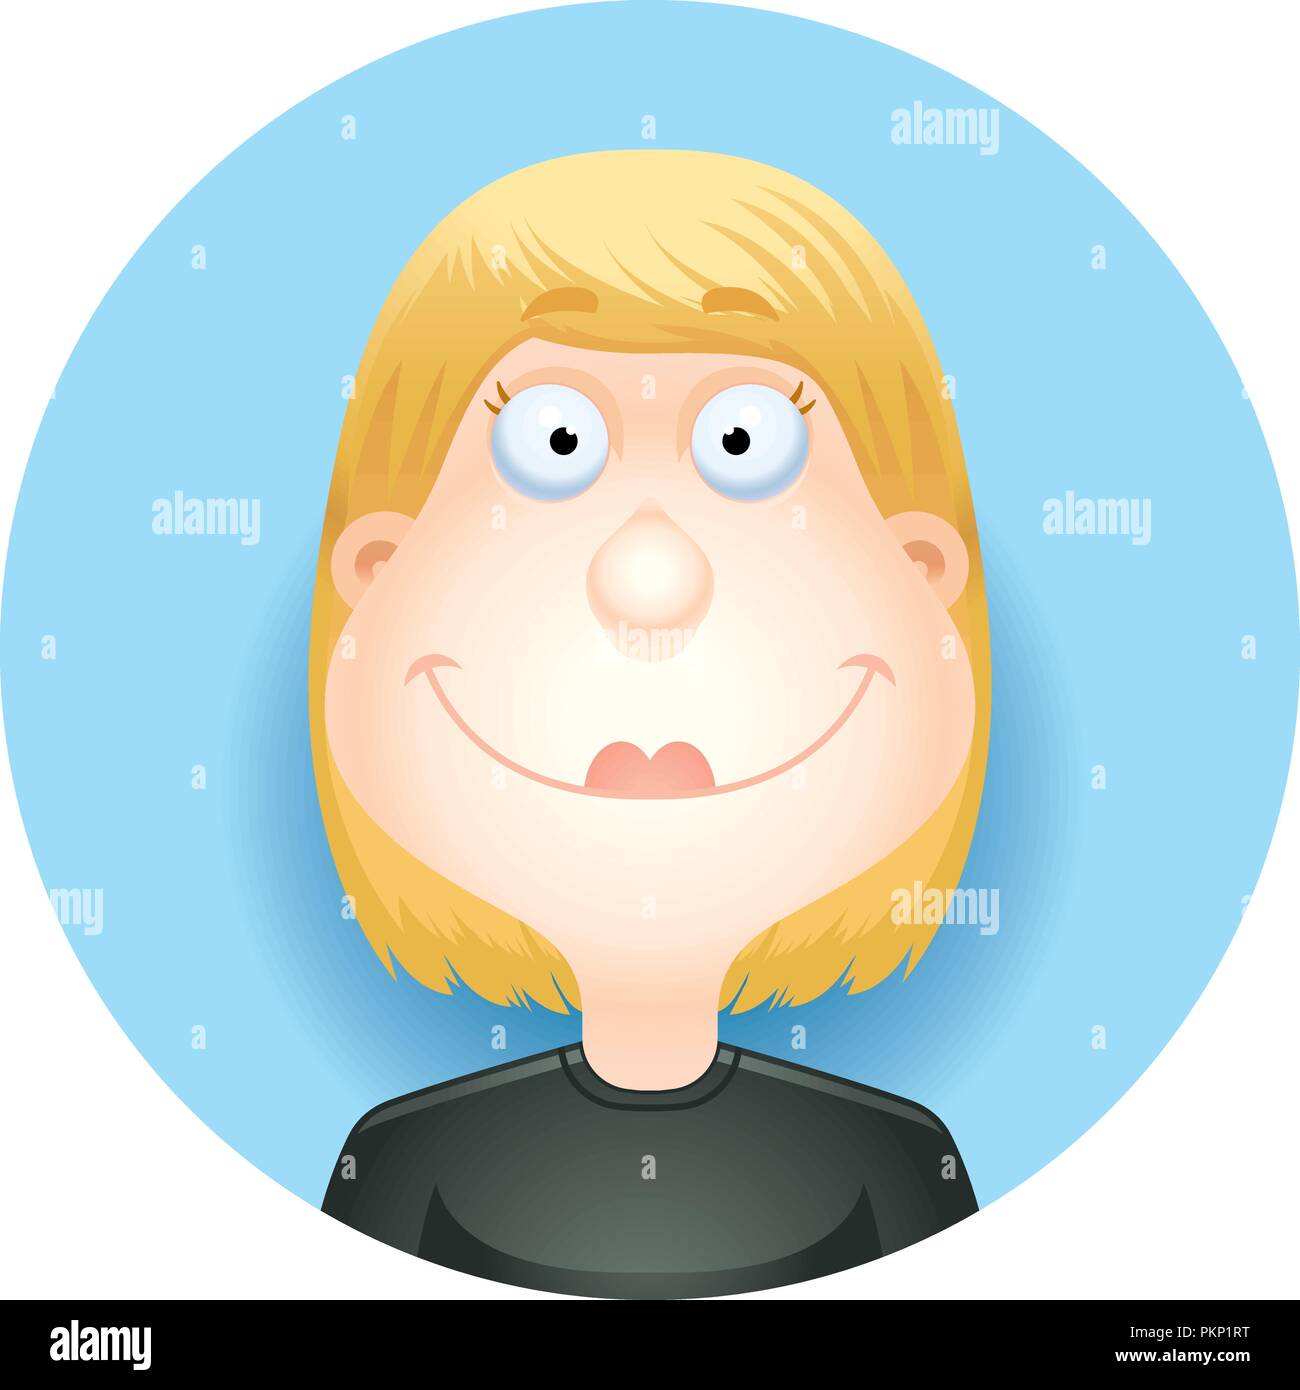 A cartoon illustration of a blond woman smiling  looking happy. Stock Vector